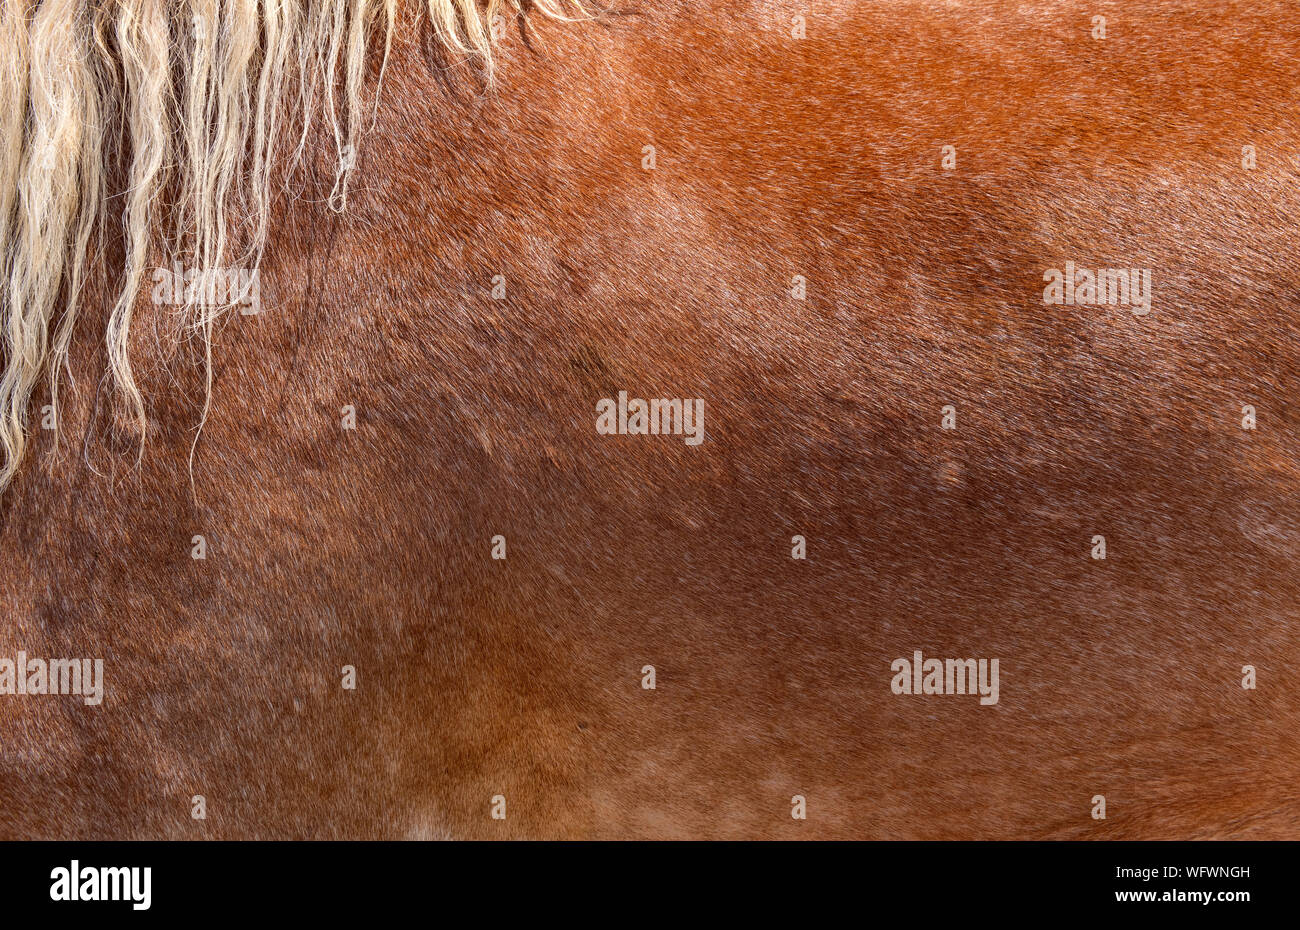 Brown horse skin, hair, or fur pattern texture background. Stock Photo